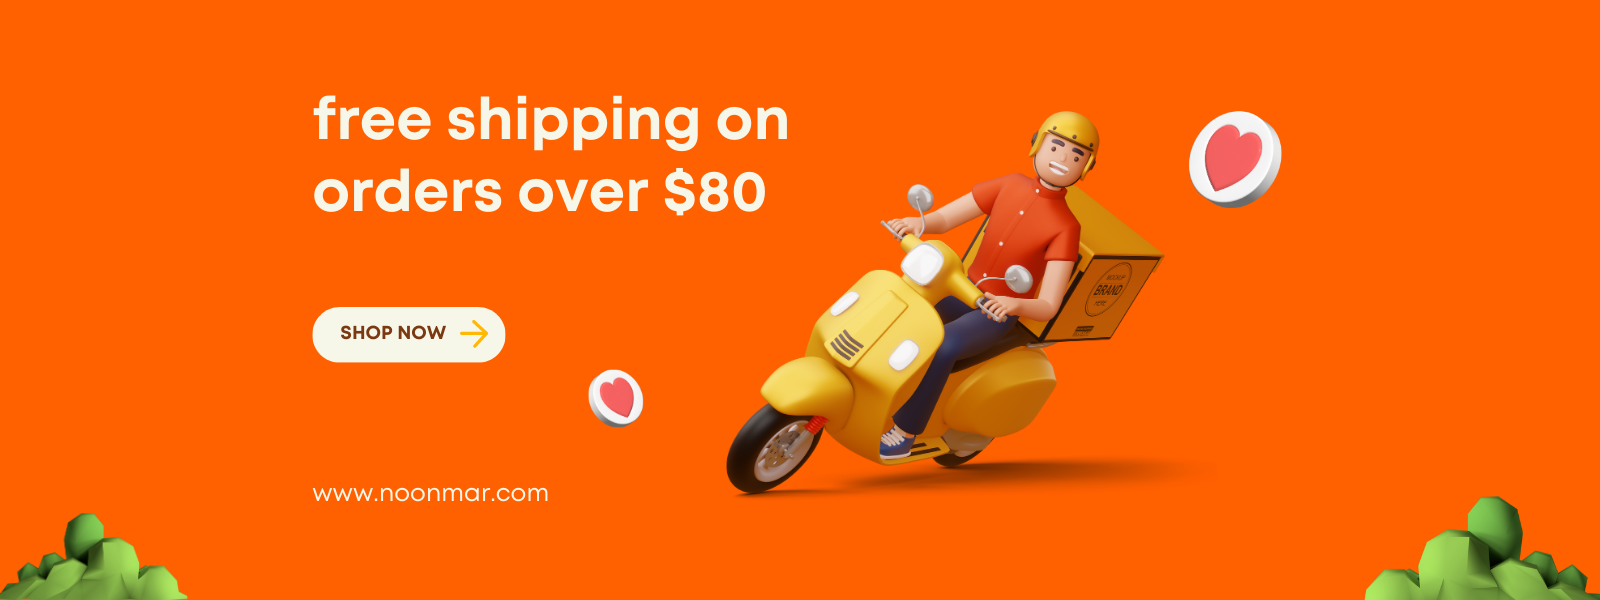 free shipping.png (210 KB)